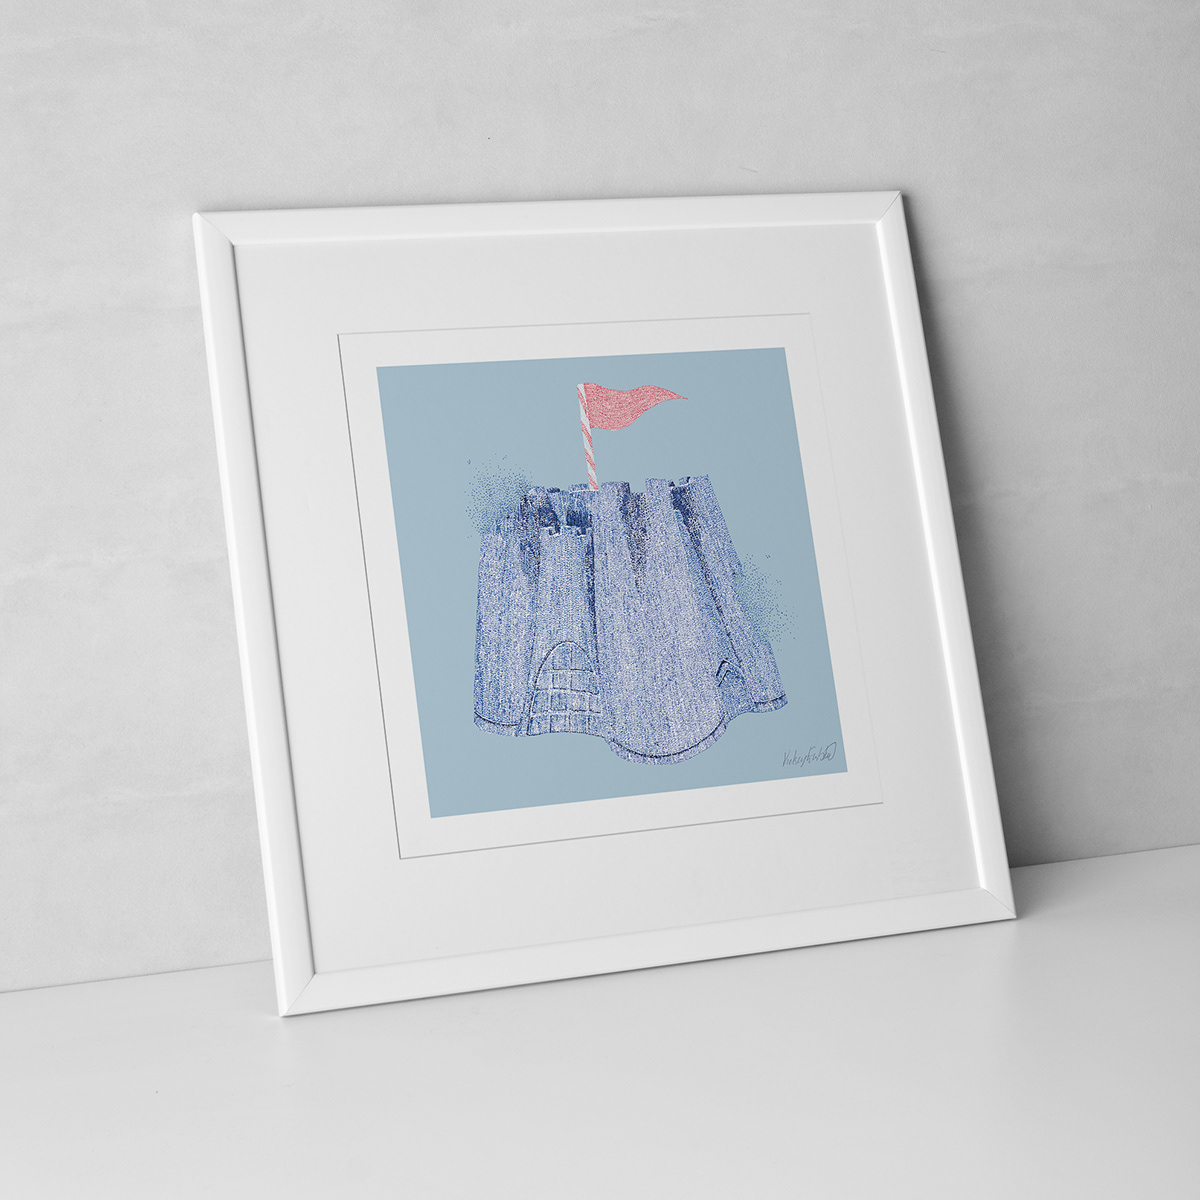 A framed print of a blue sand castle with a pink flag on a delicate blue background.